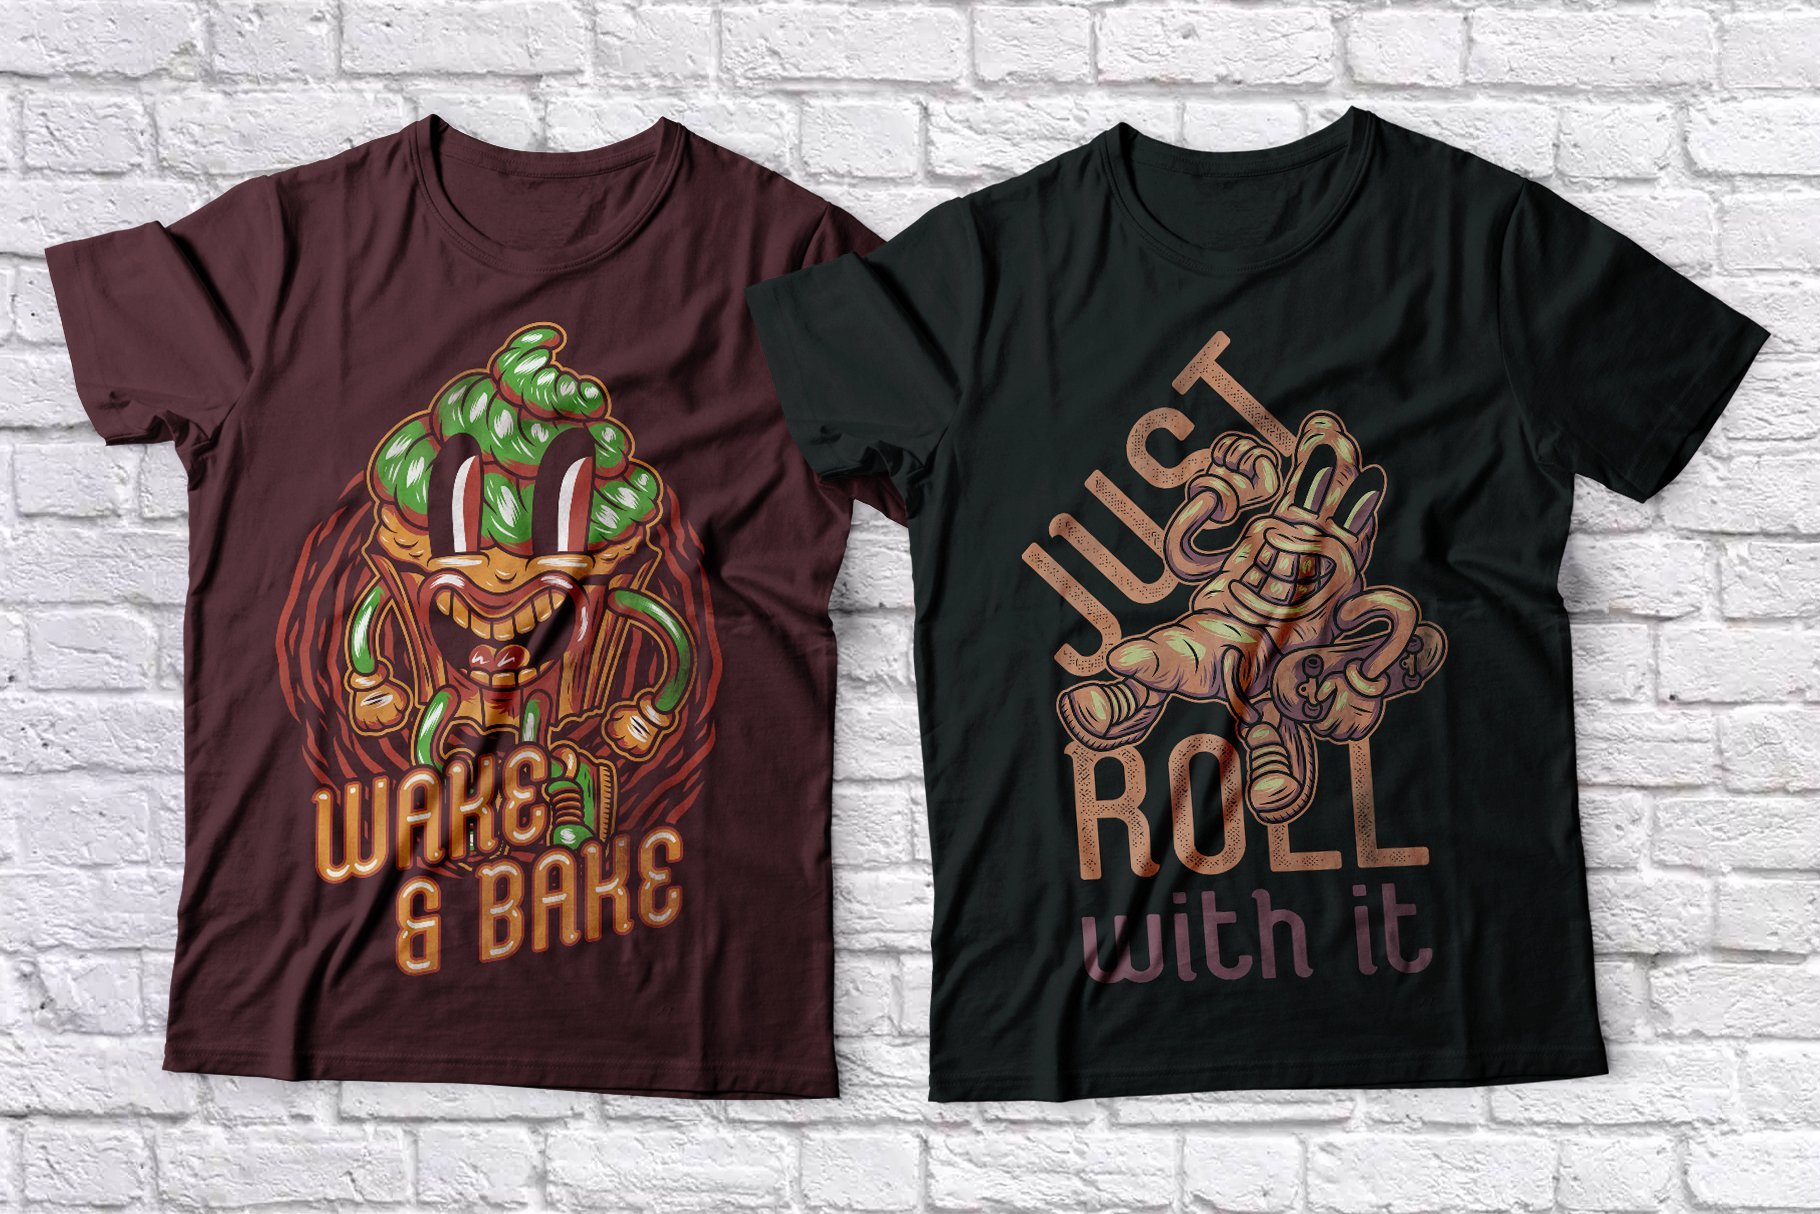 Brown and black zombie cupcake t-shirts.